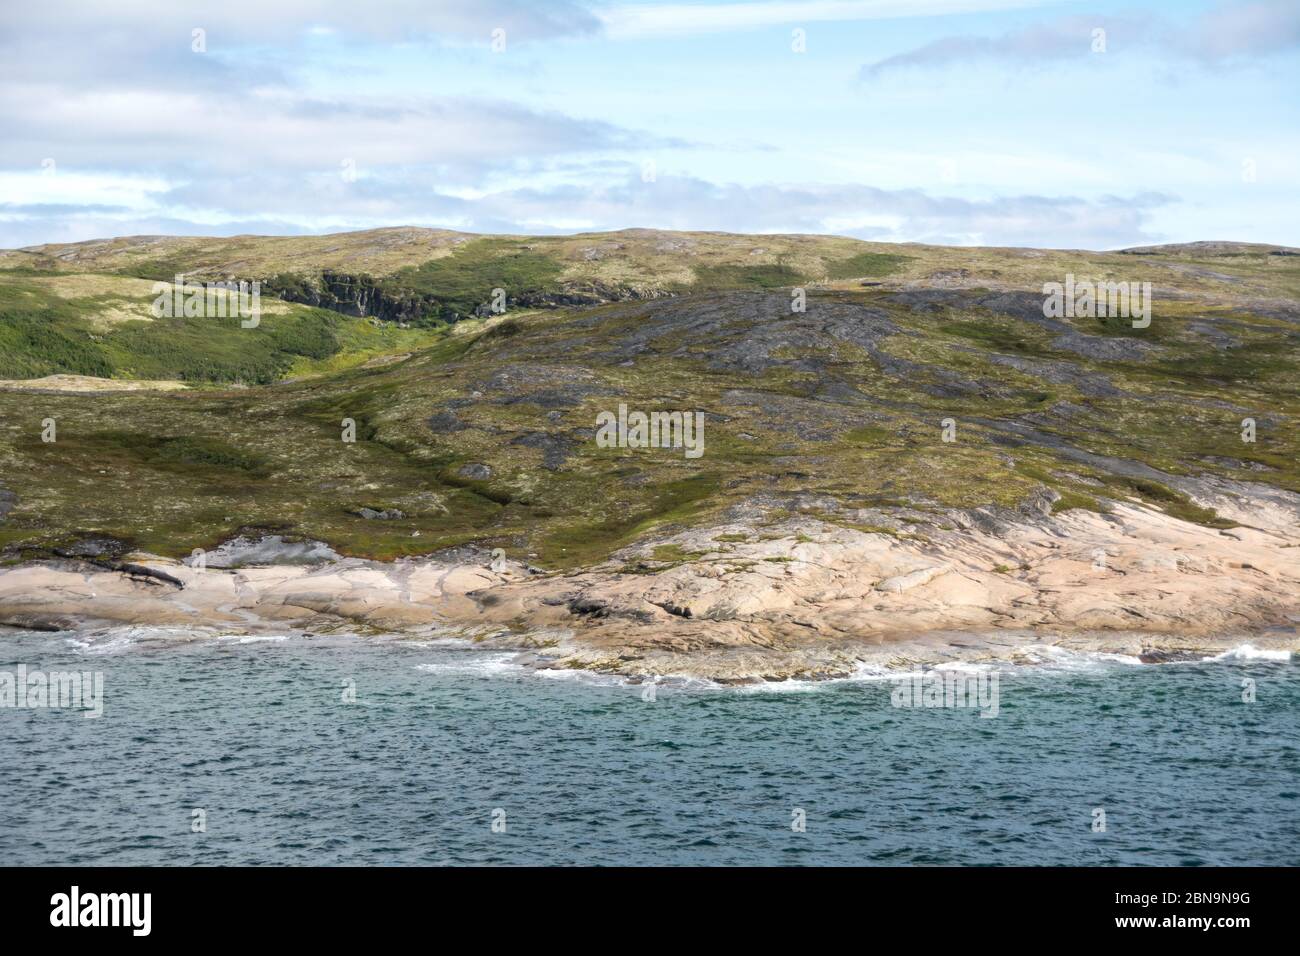 The hilly tundra shoreline on the Lower North Shore of the Gulf of St. Lawrence, Atlantic coast, near Harrington Harbour, Quebec, Canada. Stock Photo